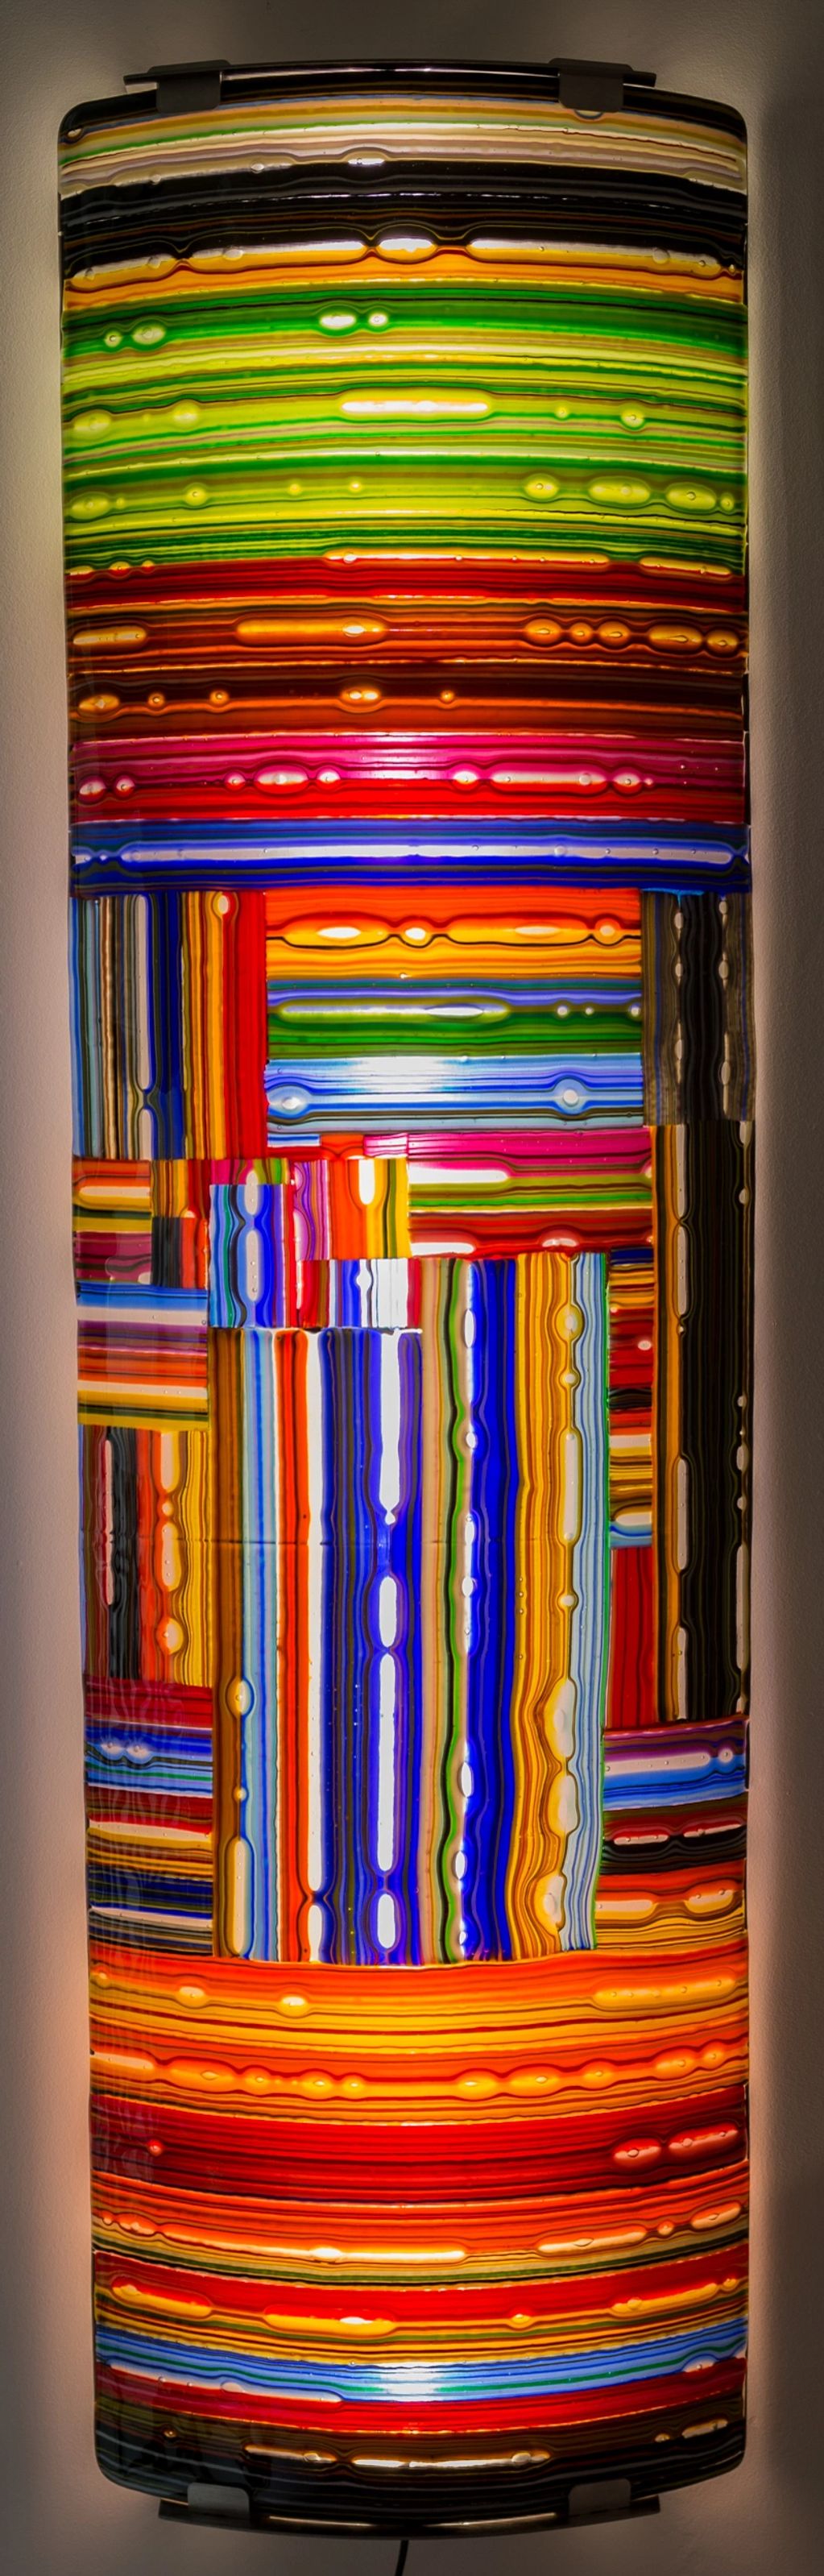 Organic style colour wall series 56 x 17 " 
Wall sculpture